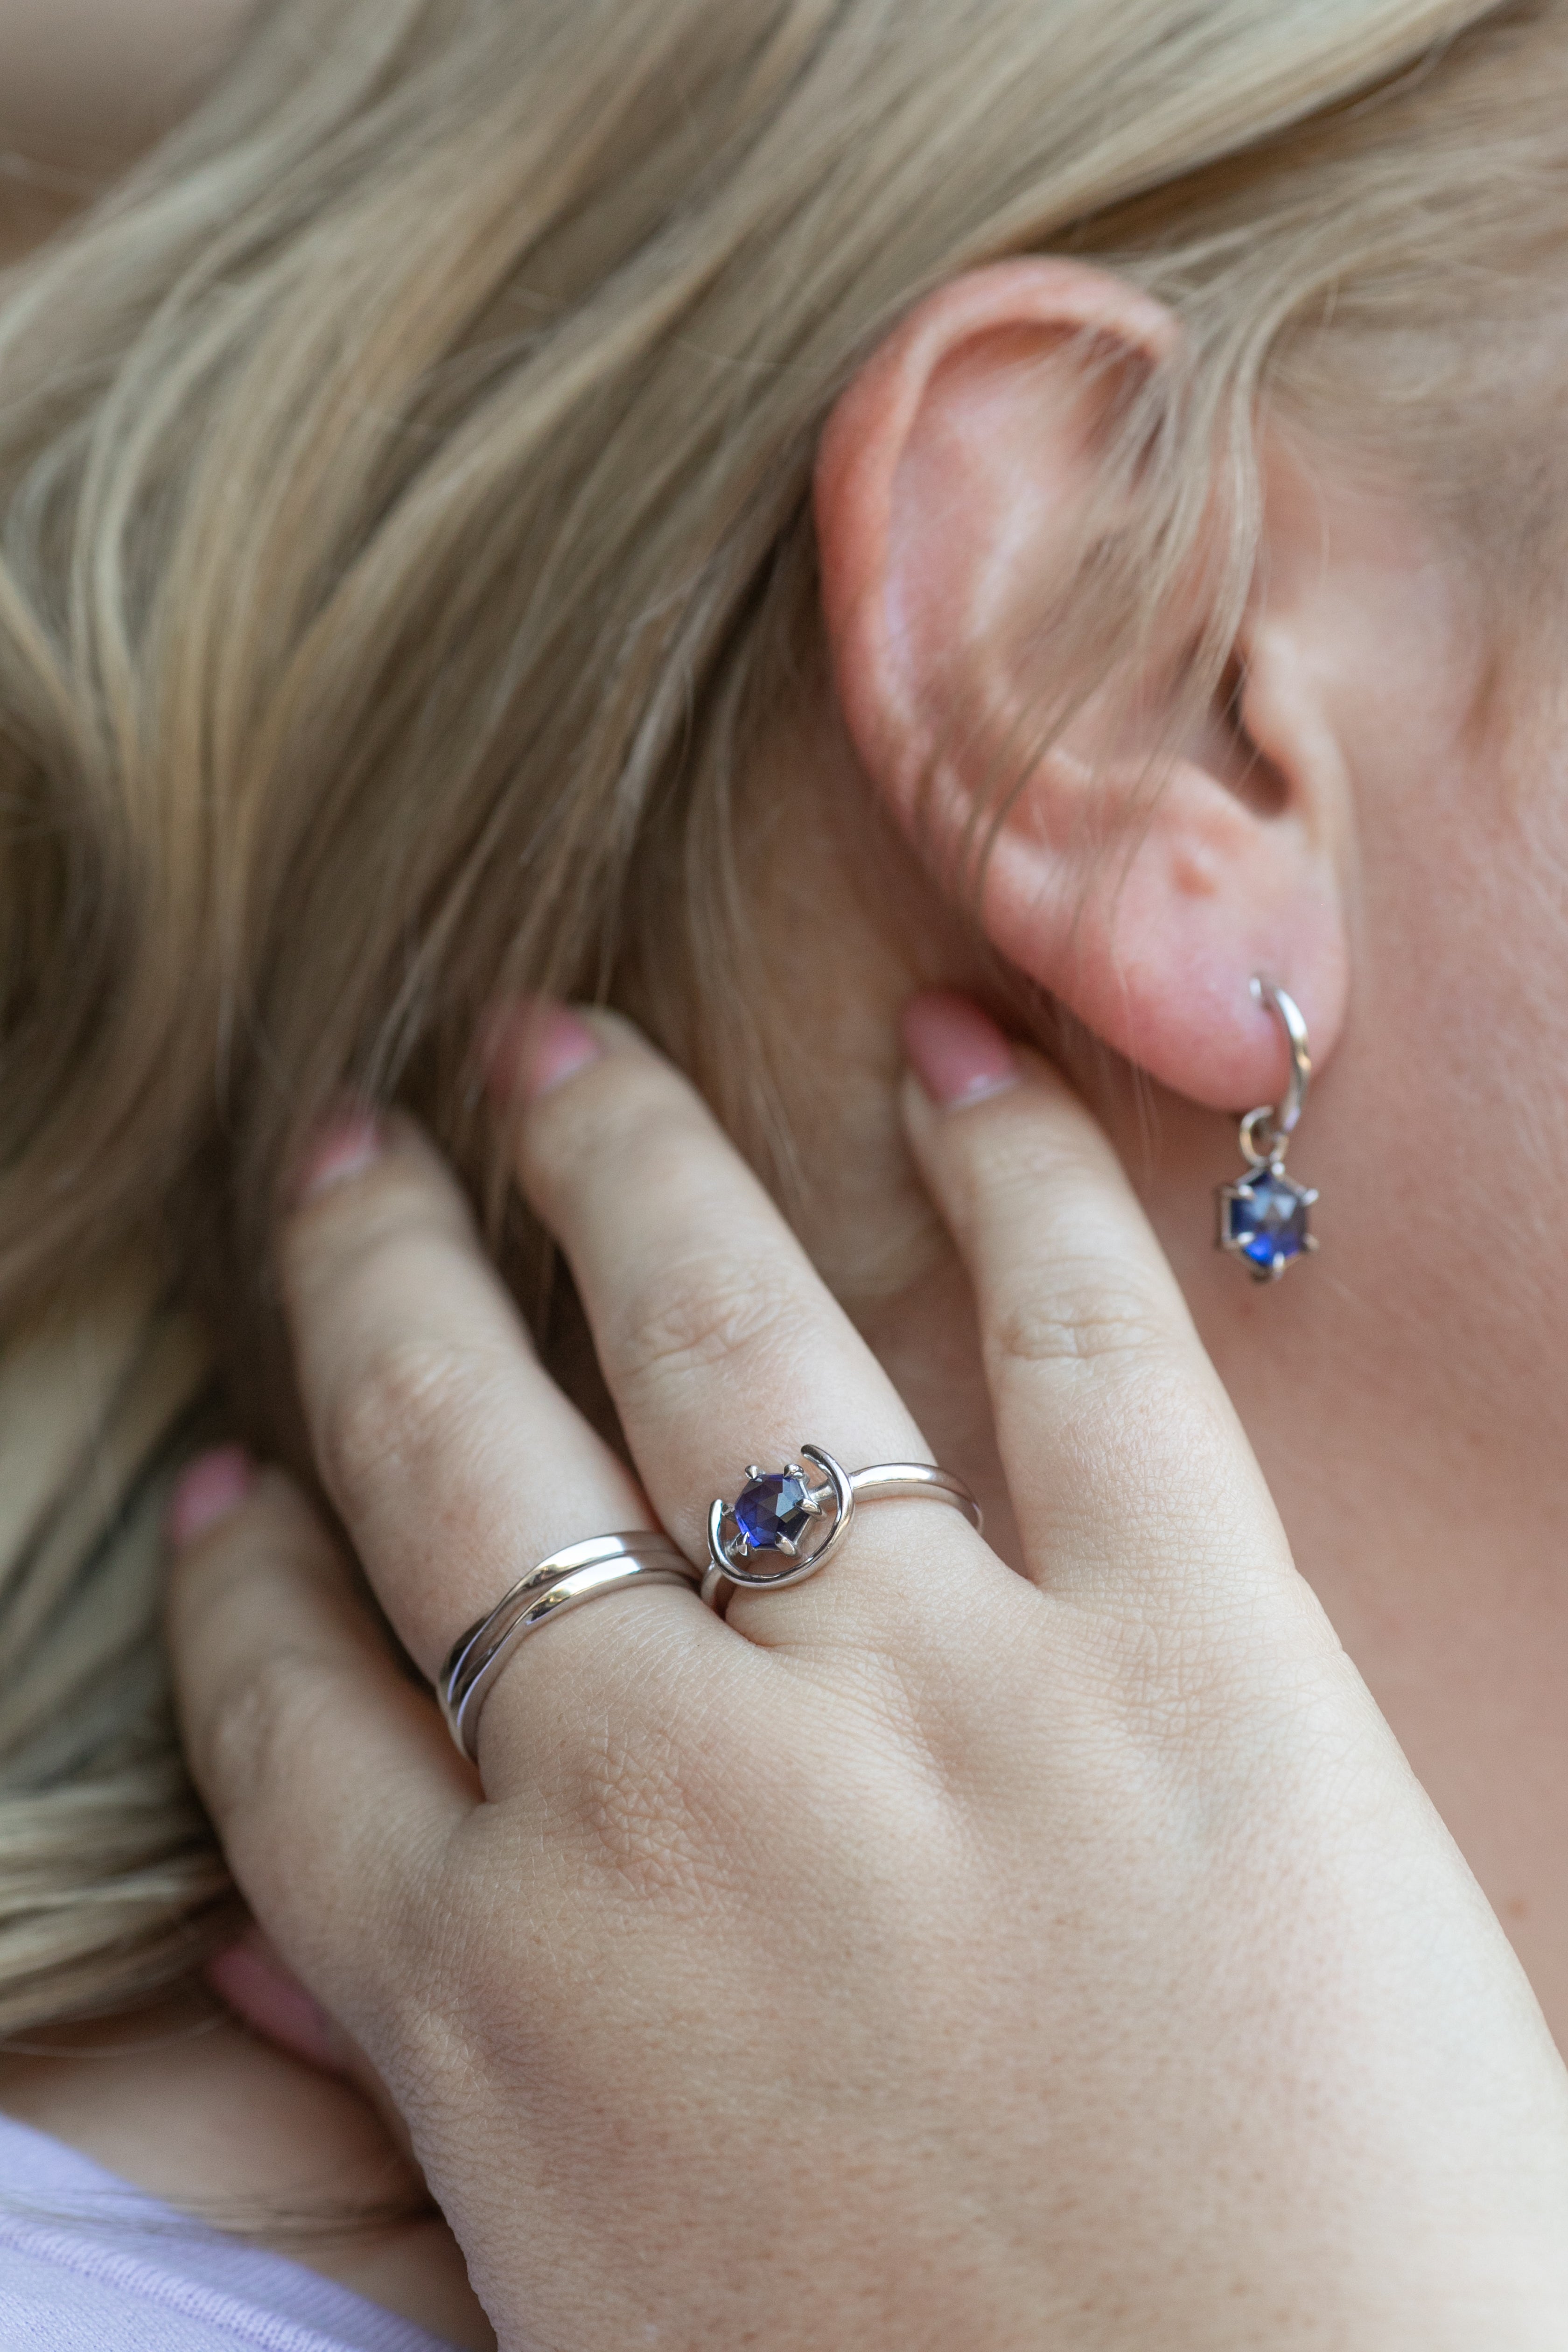 A close up shot of a blonde woman's ear wearing a silver and tanzanite gemstone huggie hoop earring. Her hand is rested near her hair, wearing two silver twist rings stacked on her middle finger and a gemstone ring in silver and tanzanite on her ring finger.